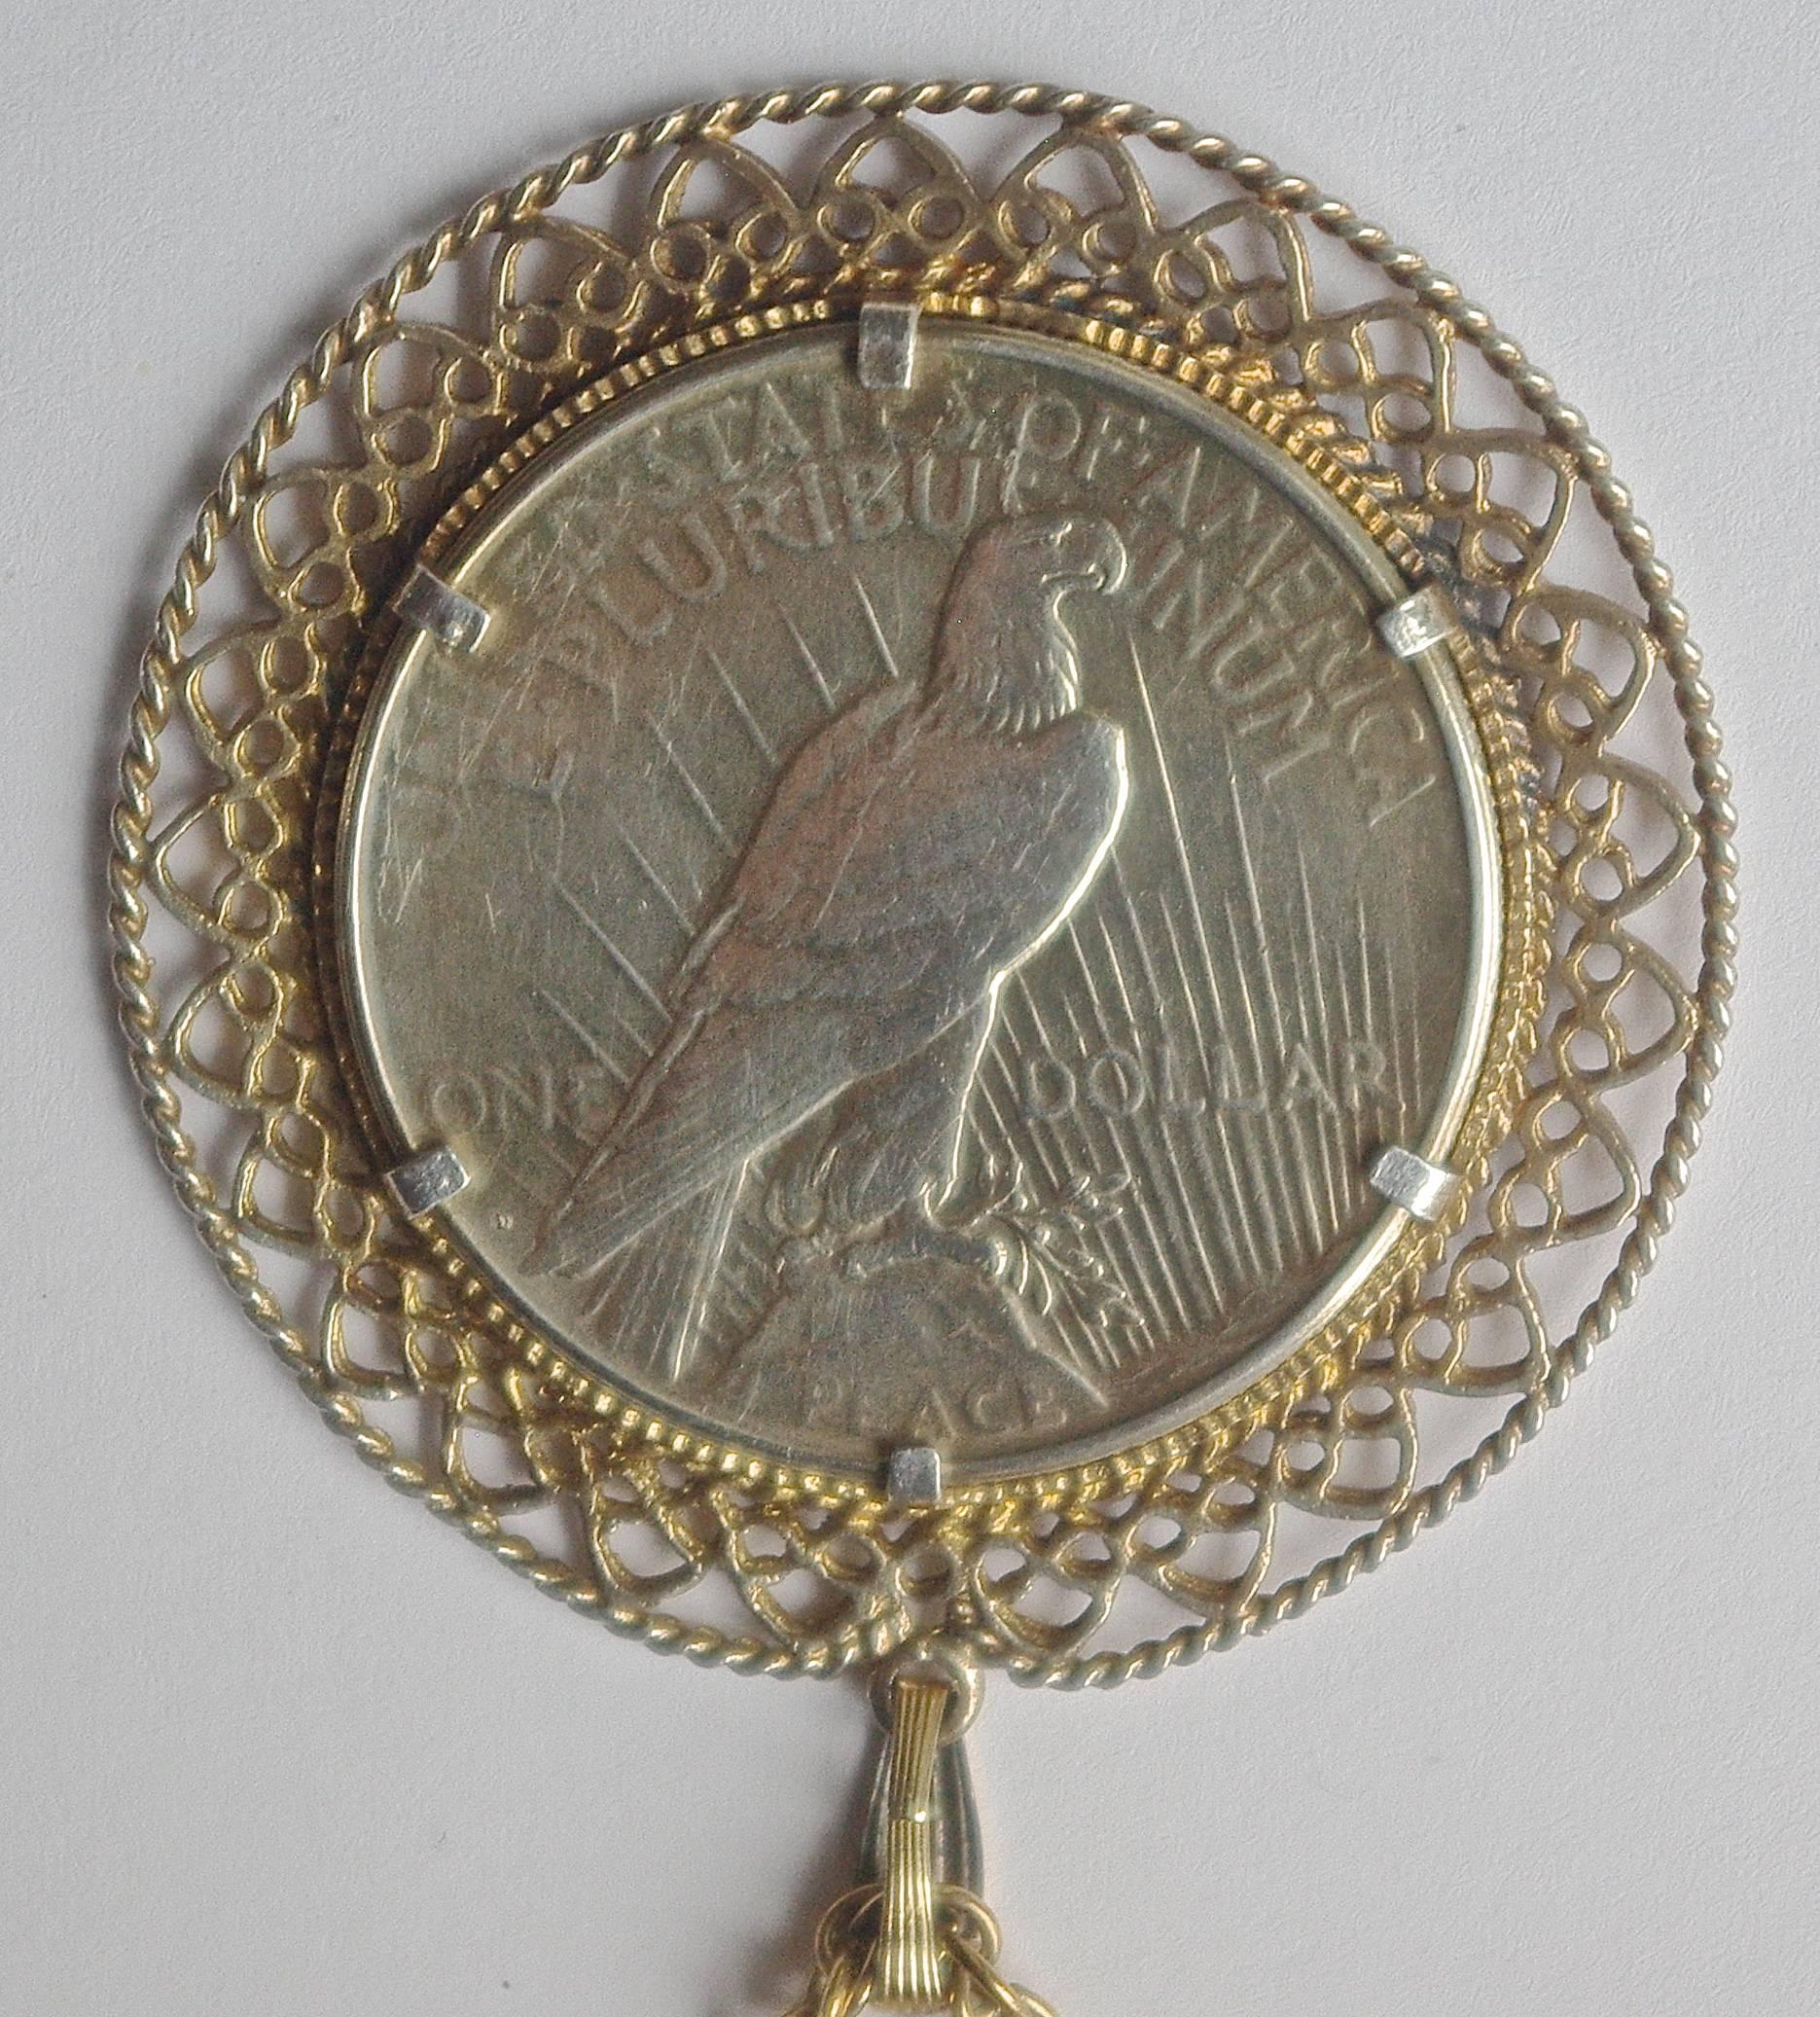 Vintage gold filled one dollar liberty peace coin, set in an intricately detailed surround, the chain is stamped 1/20 12K GF.
The lovely pendant is diameter 5.3cm, 2.08 inches, and the fancy chain is length 62cm, 24.41 inches.

This is a beautiful